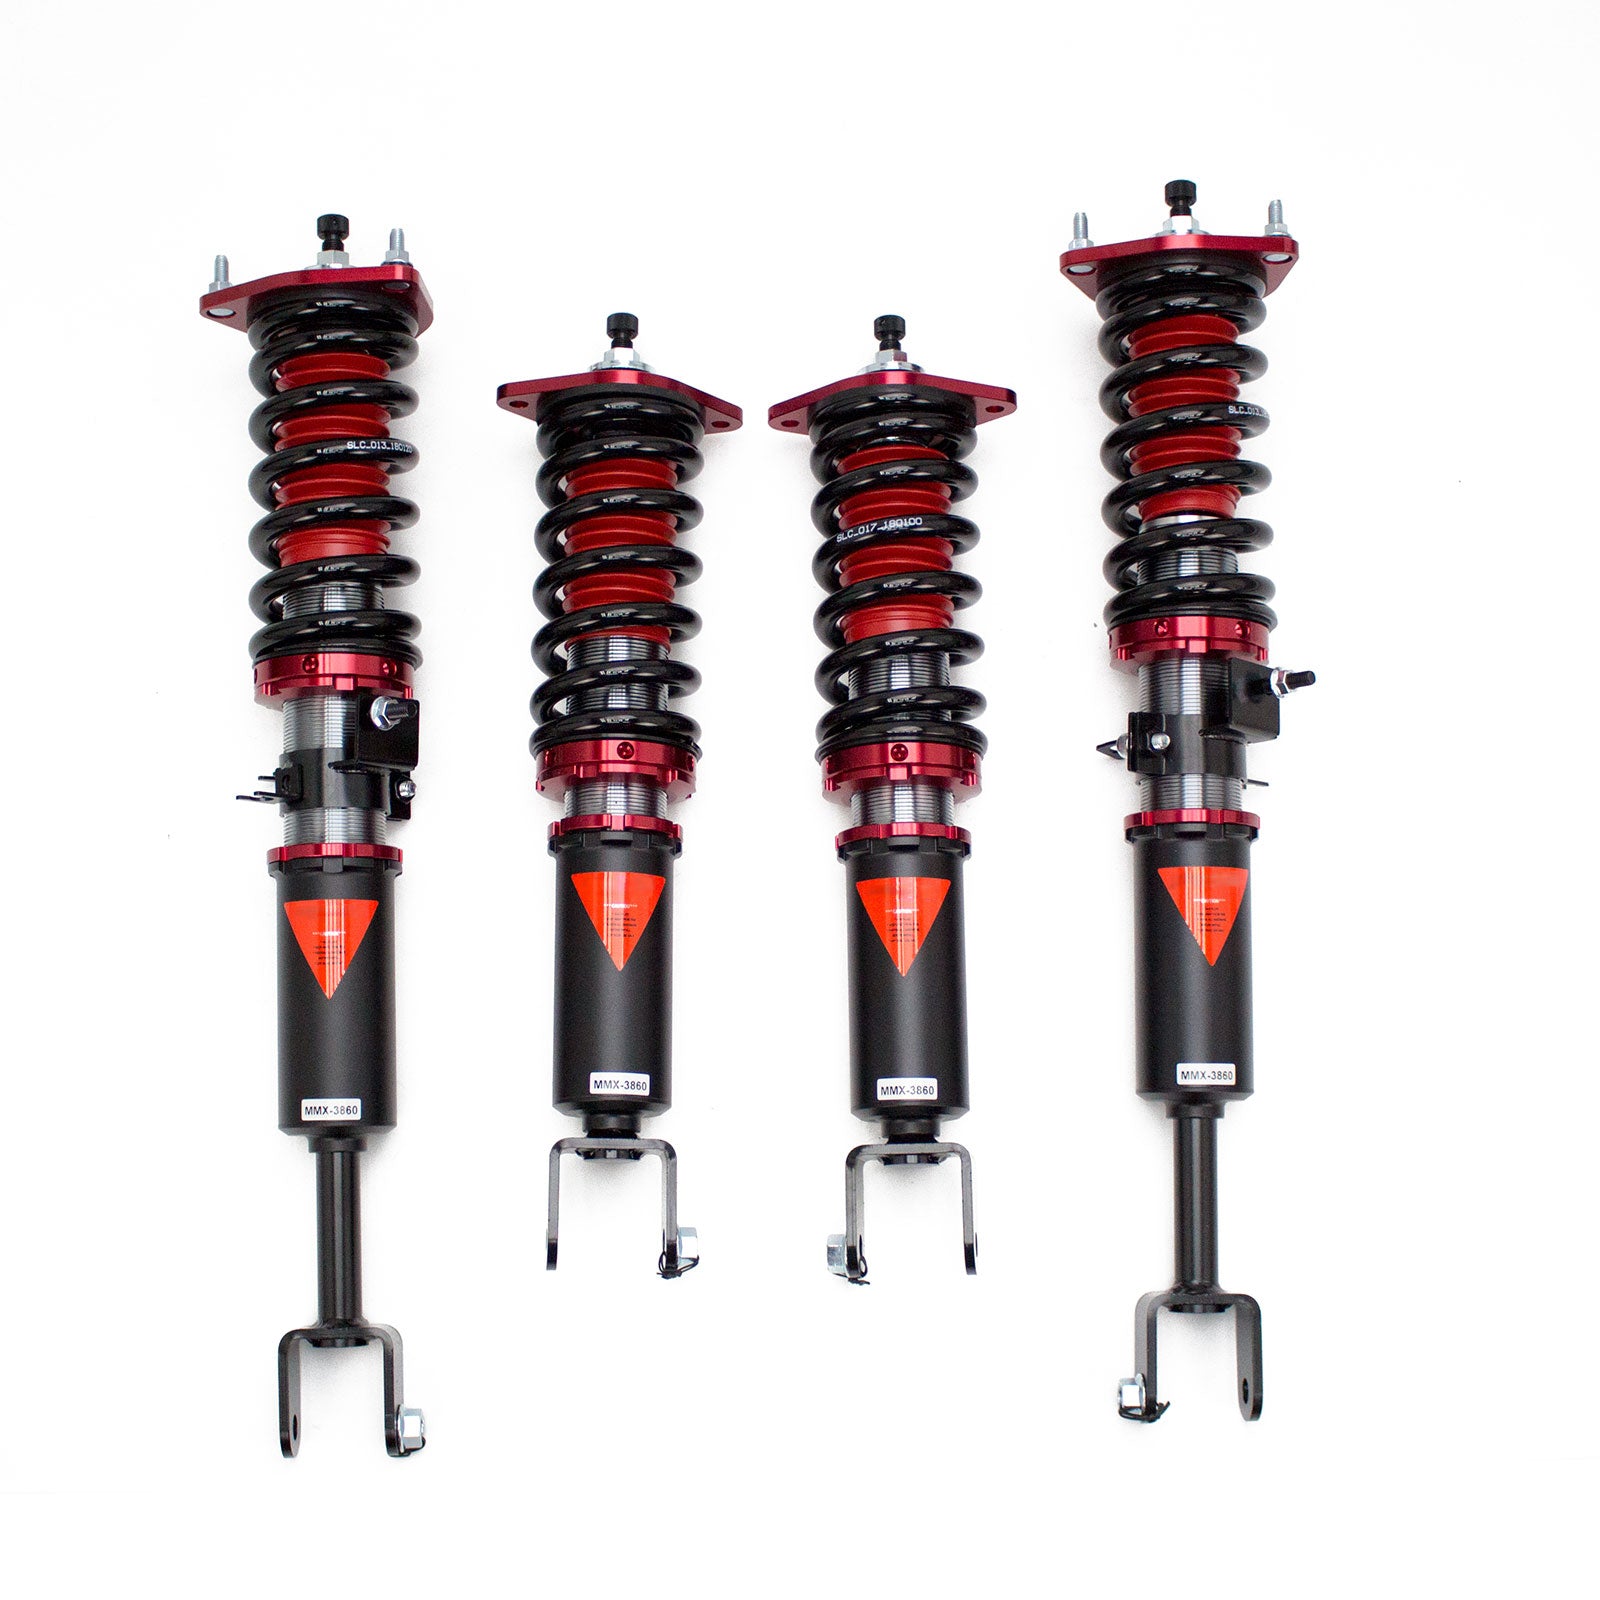 MMX3860-A MAXX Coilovers Lowering Kit, Fully Adjustable, Ride Height, 40 Clicks Rebound Settings, Nissan 350Z(Z33) 2003-09